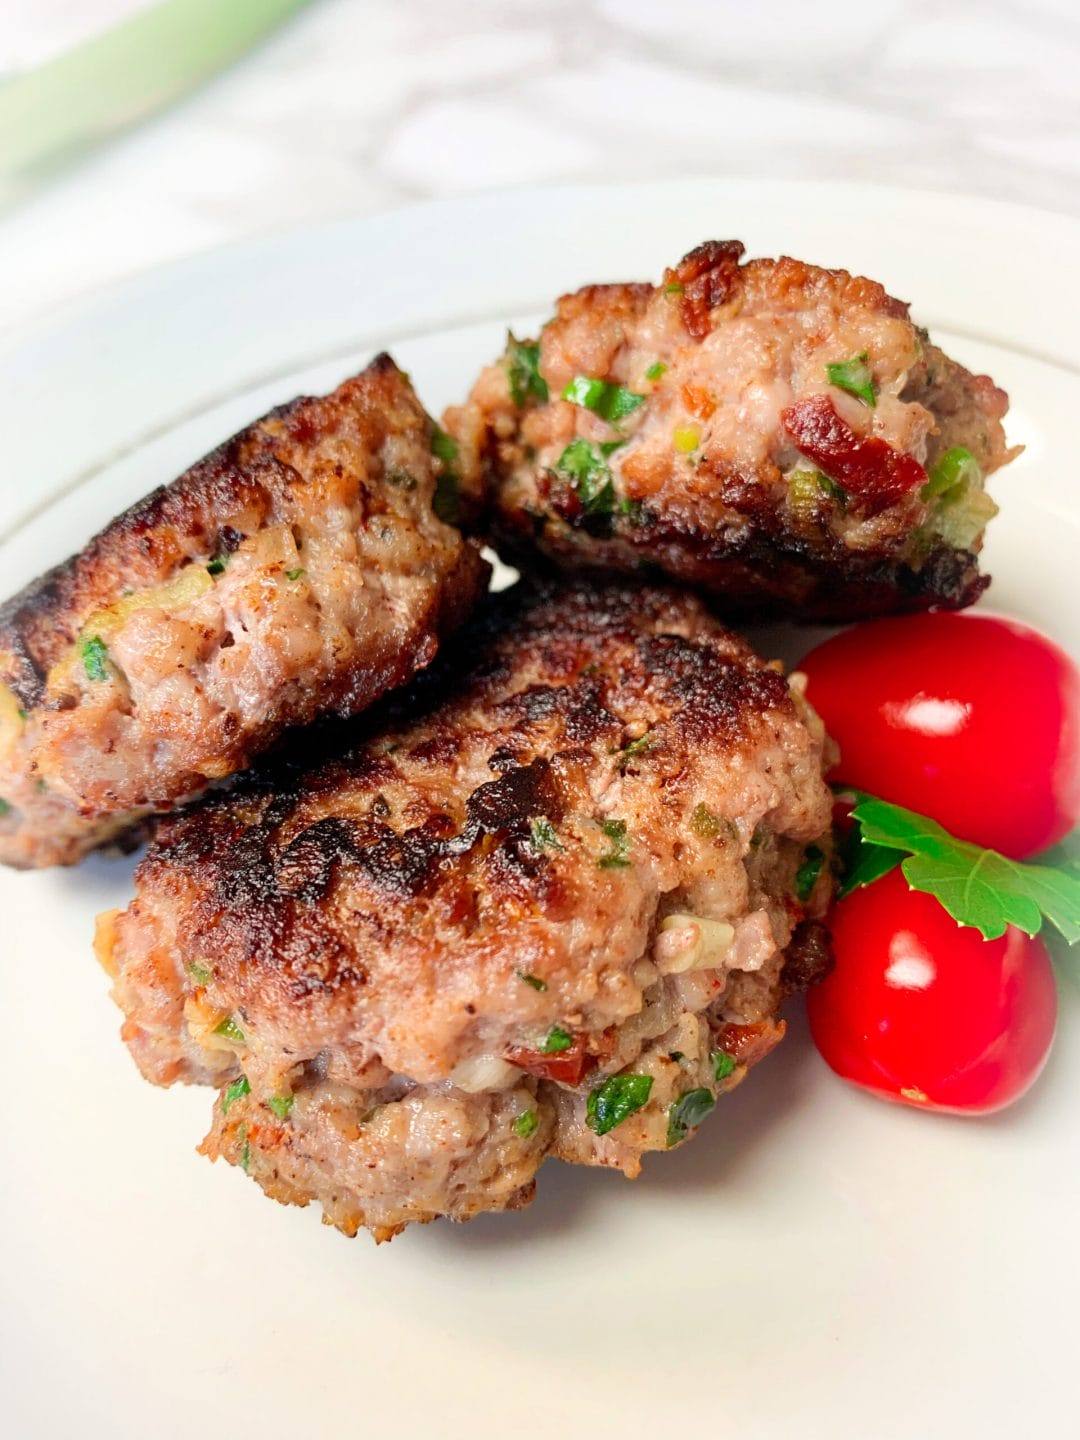 Picture of keto breakfast sausage patties on a plate with cherry tomatoes